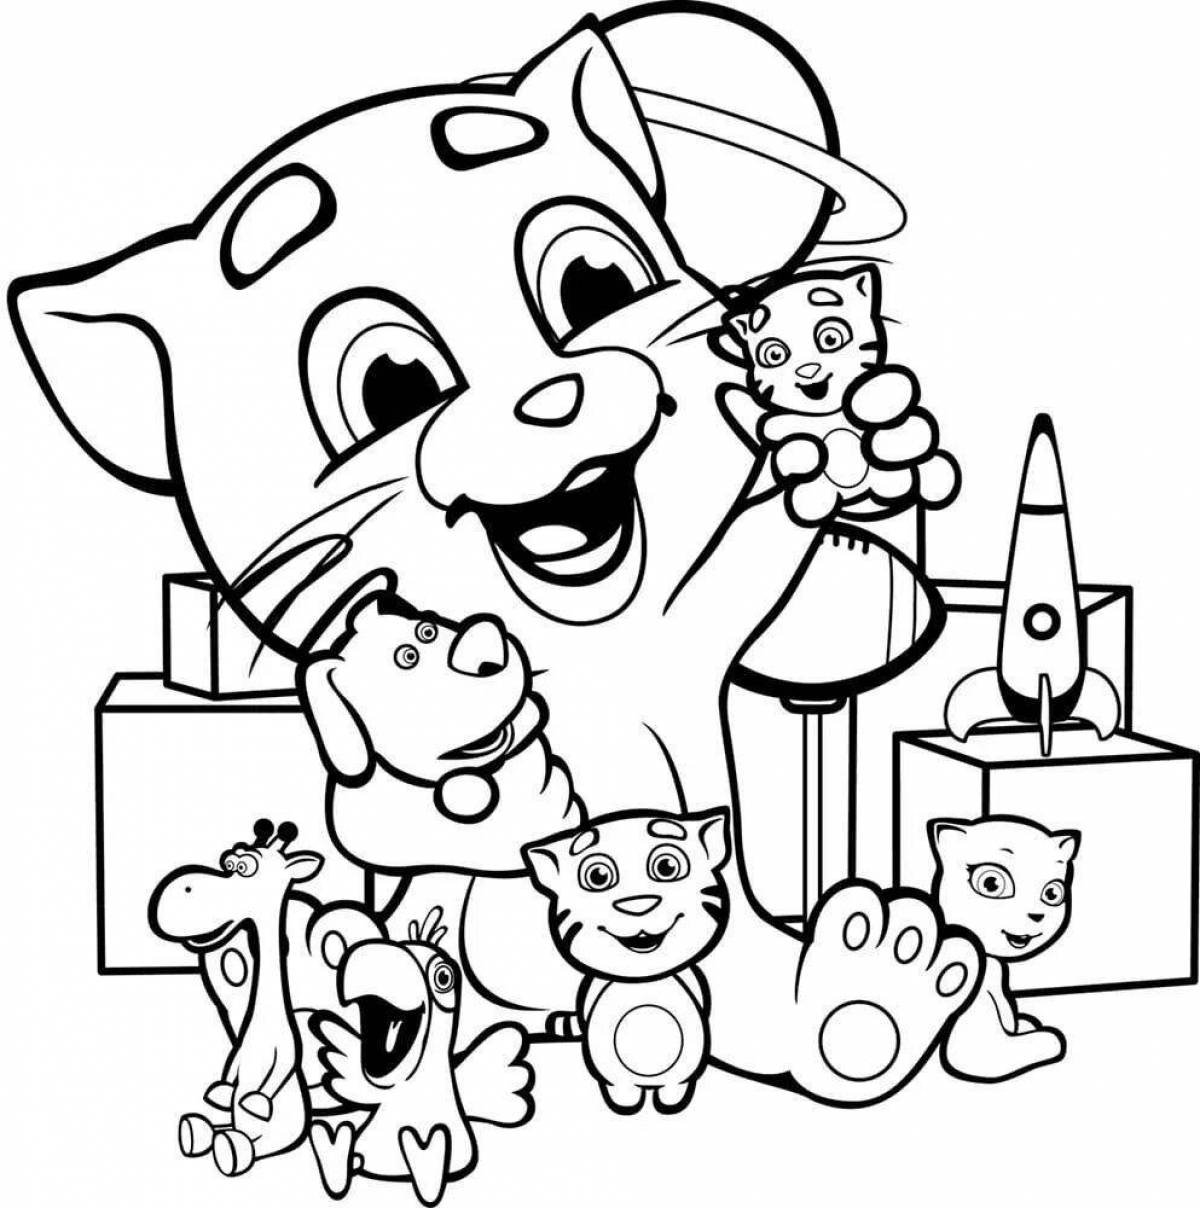 Joyful tom and angela coloring pages for kids